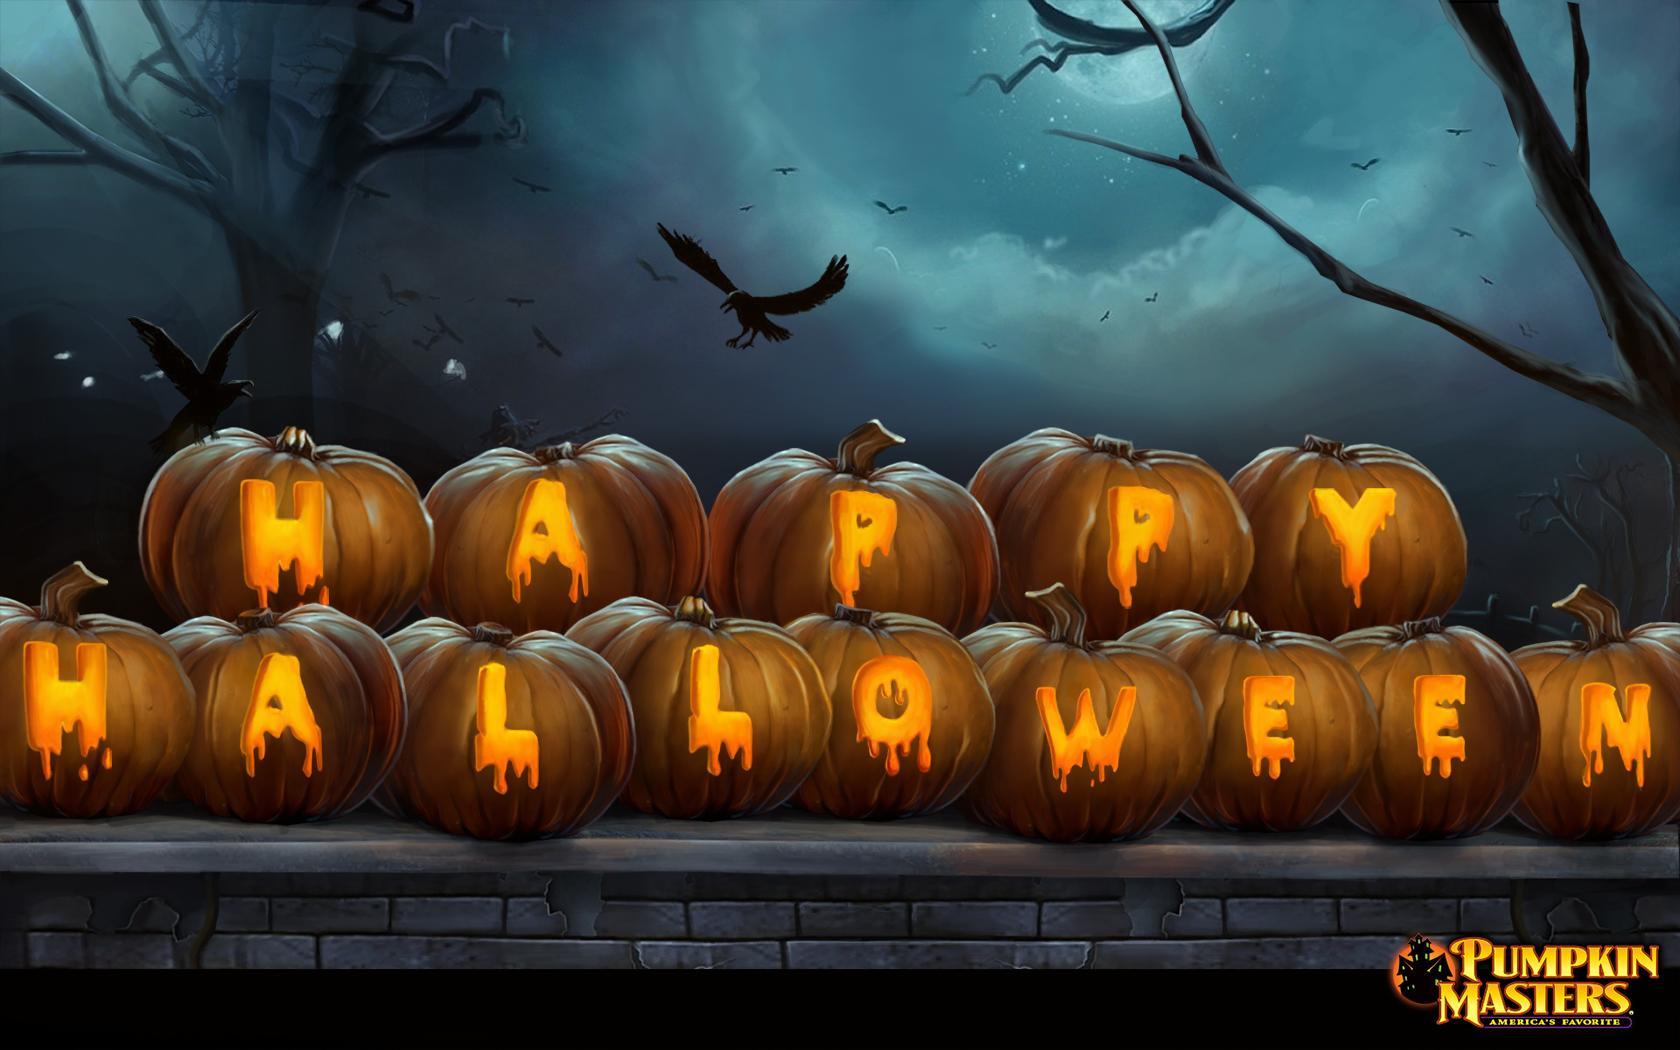 Top 131 + Animated halloween wallpaper for android - Lestwinsonline.com